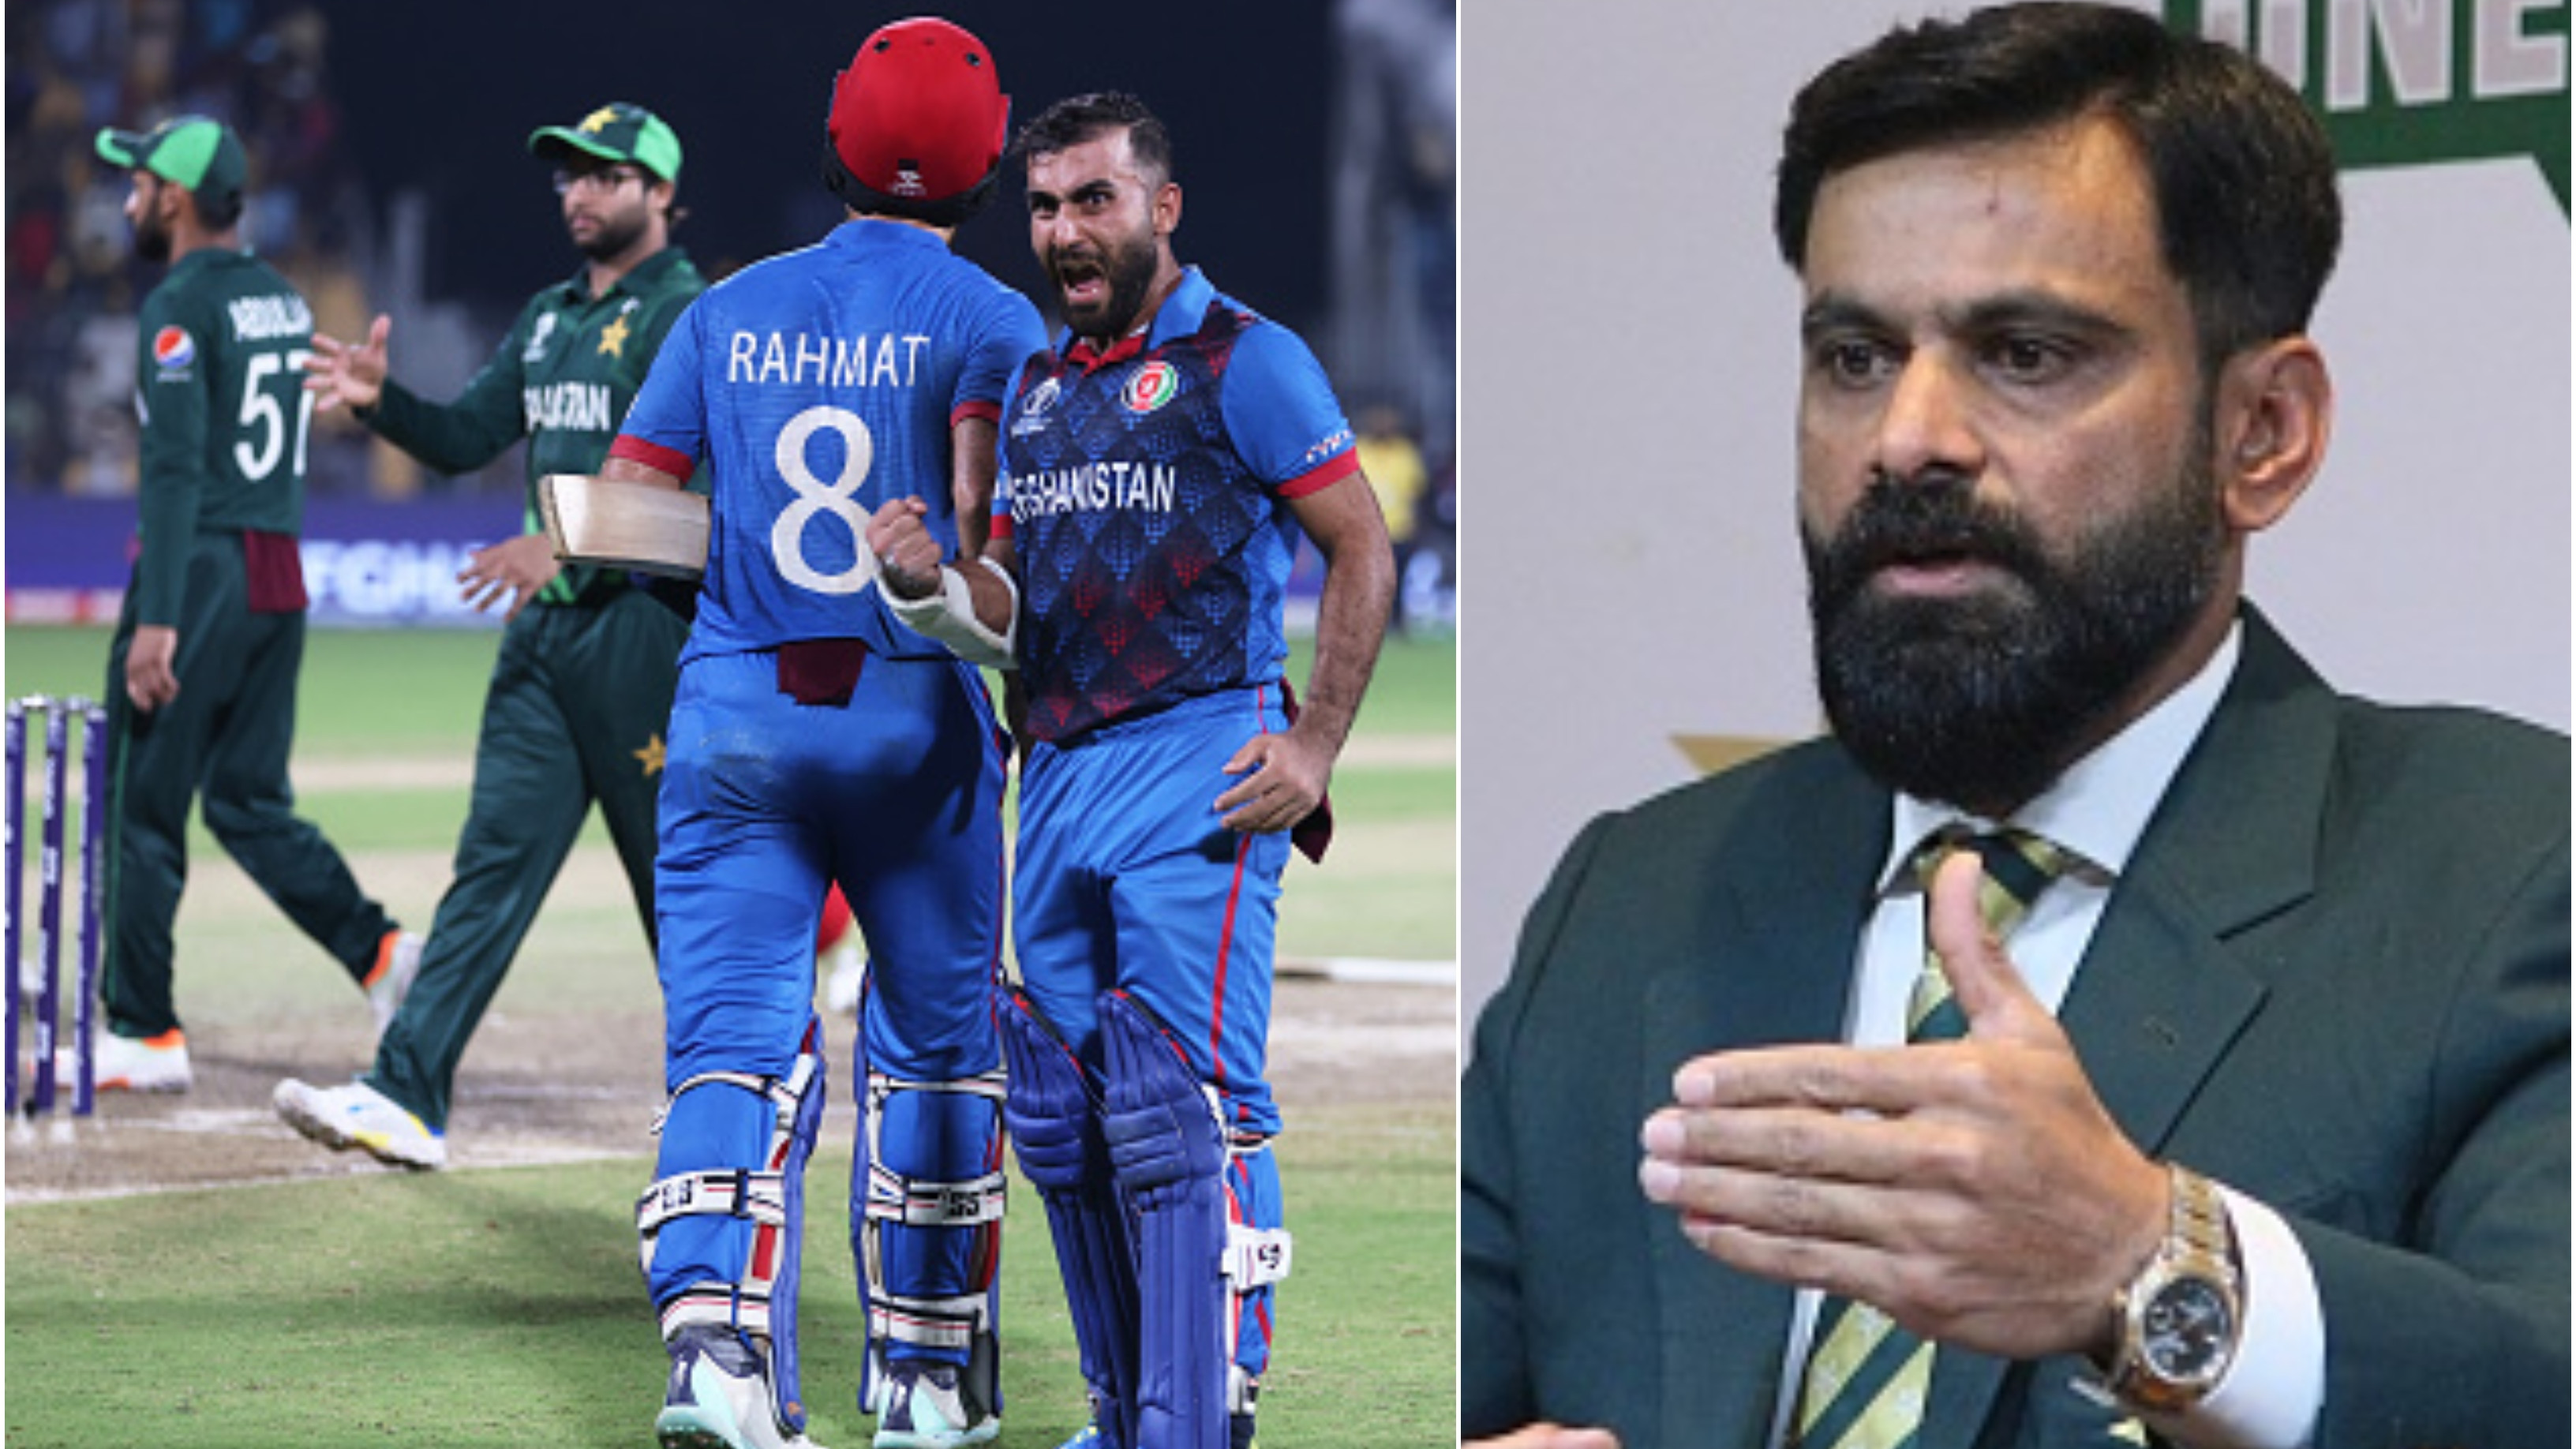 CWC 2023: “One should not think it was an upset,” says Mohammad Hafeez after Pakistan’s 8-wicket loss to Afghanistan